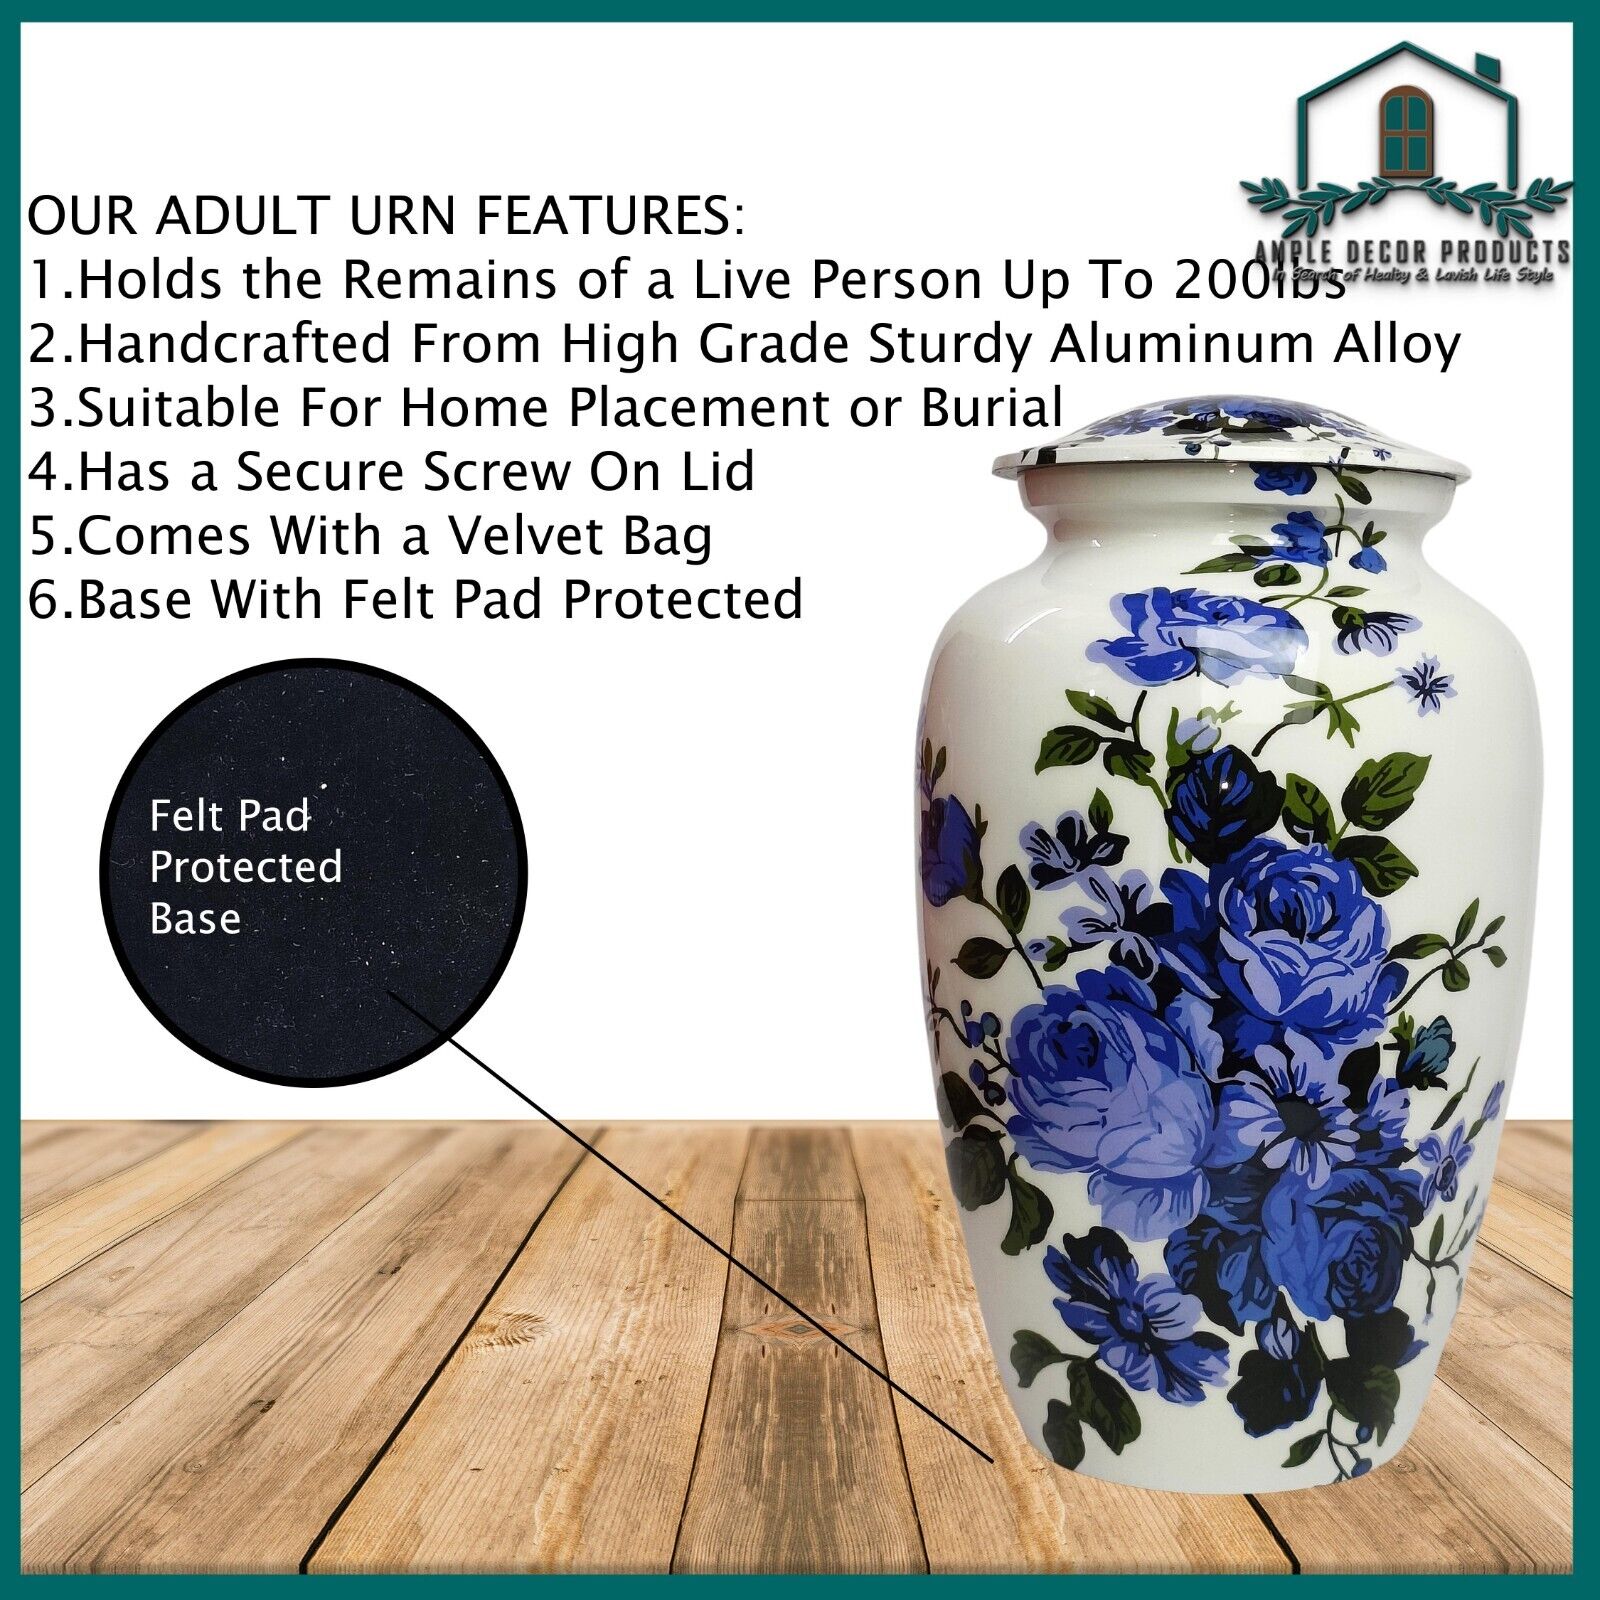 In Loving Memory with This Large Floral Cremation Urns for Human Ashes & Pet Urn